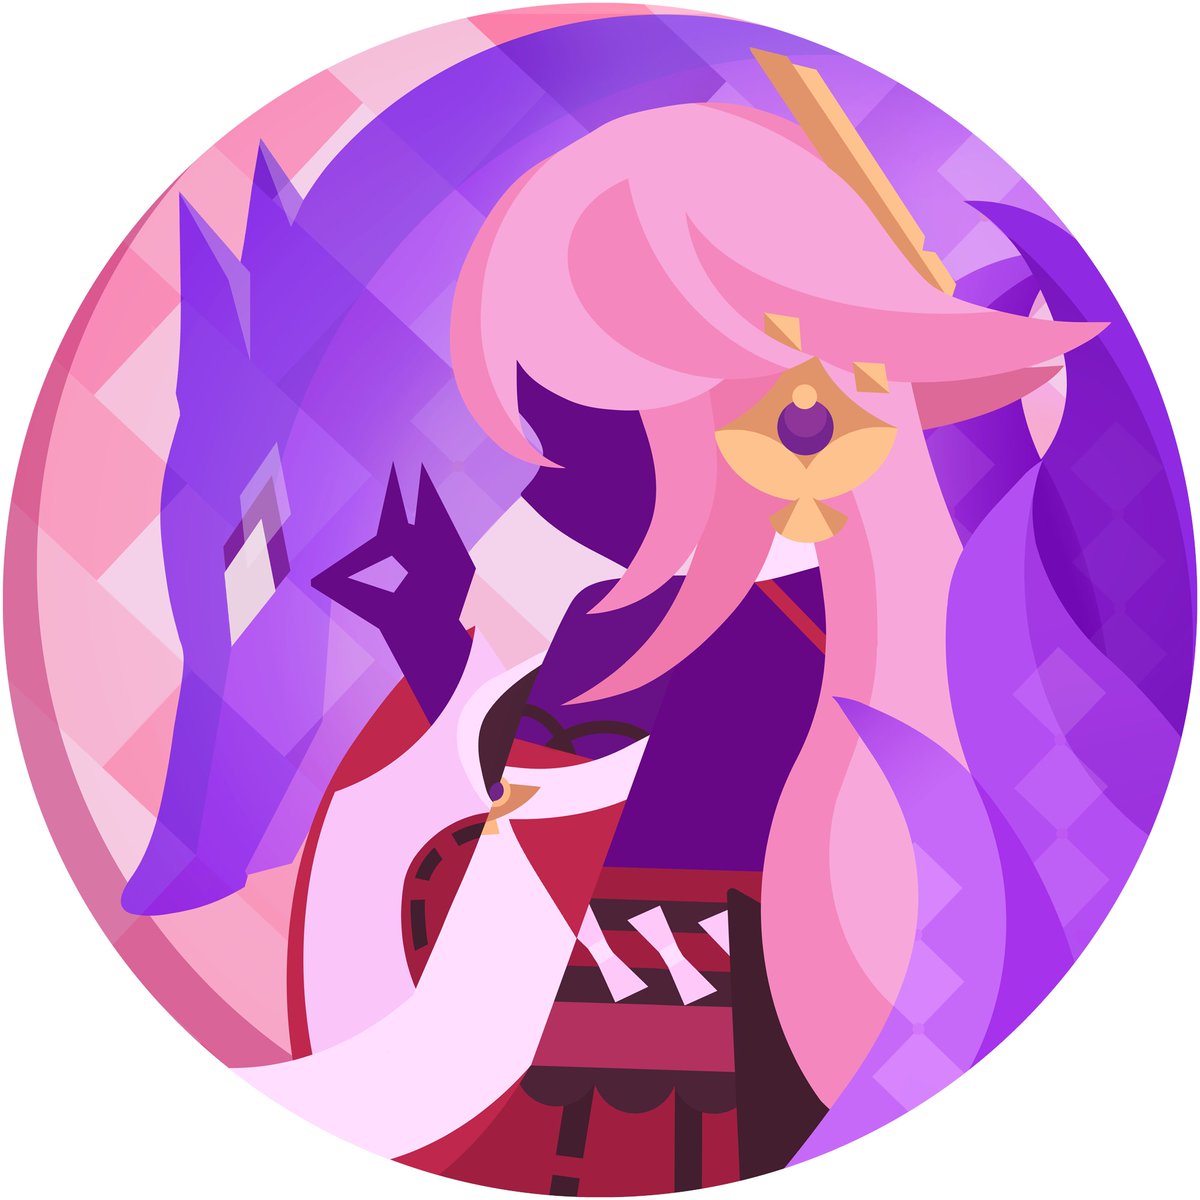 my attempt at #yaemiko icon for the new music event #GenshinImpact